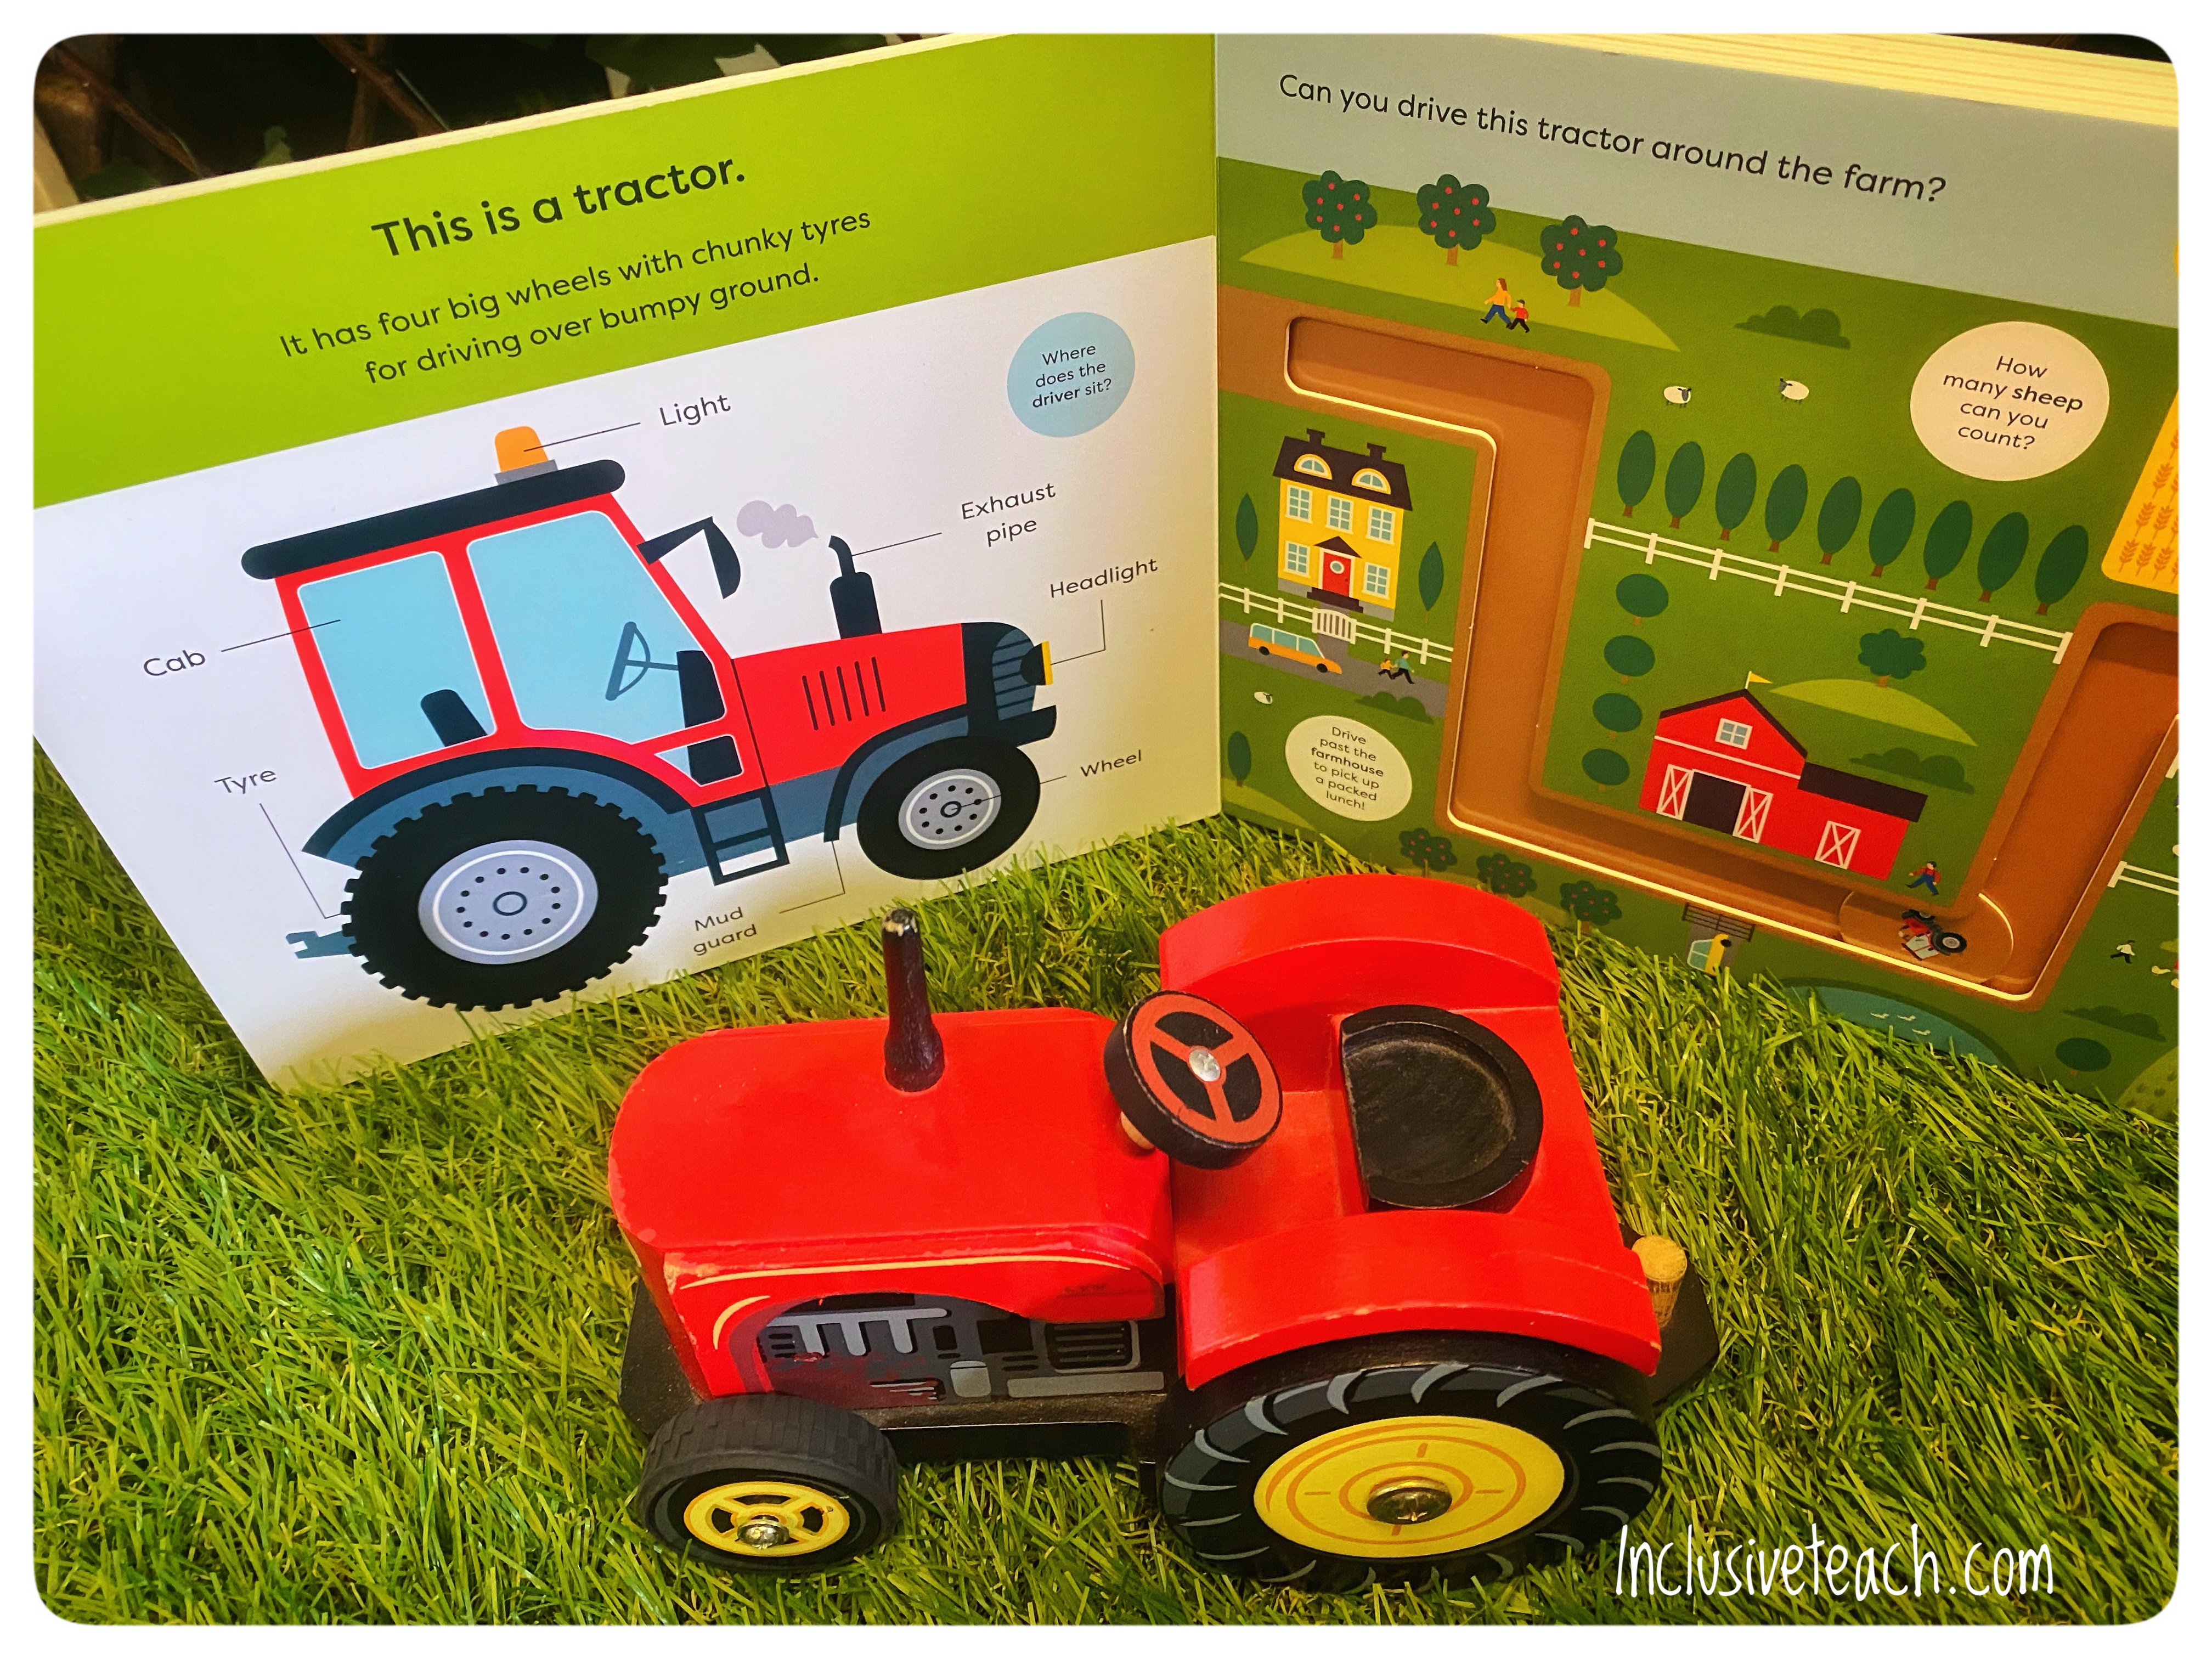 Make tracks book with toy tractor on astro turf. Open to red page this is a tractor